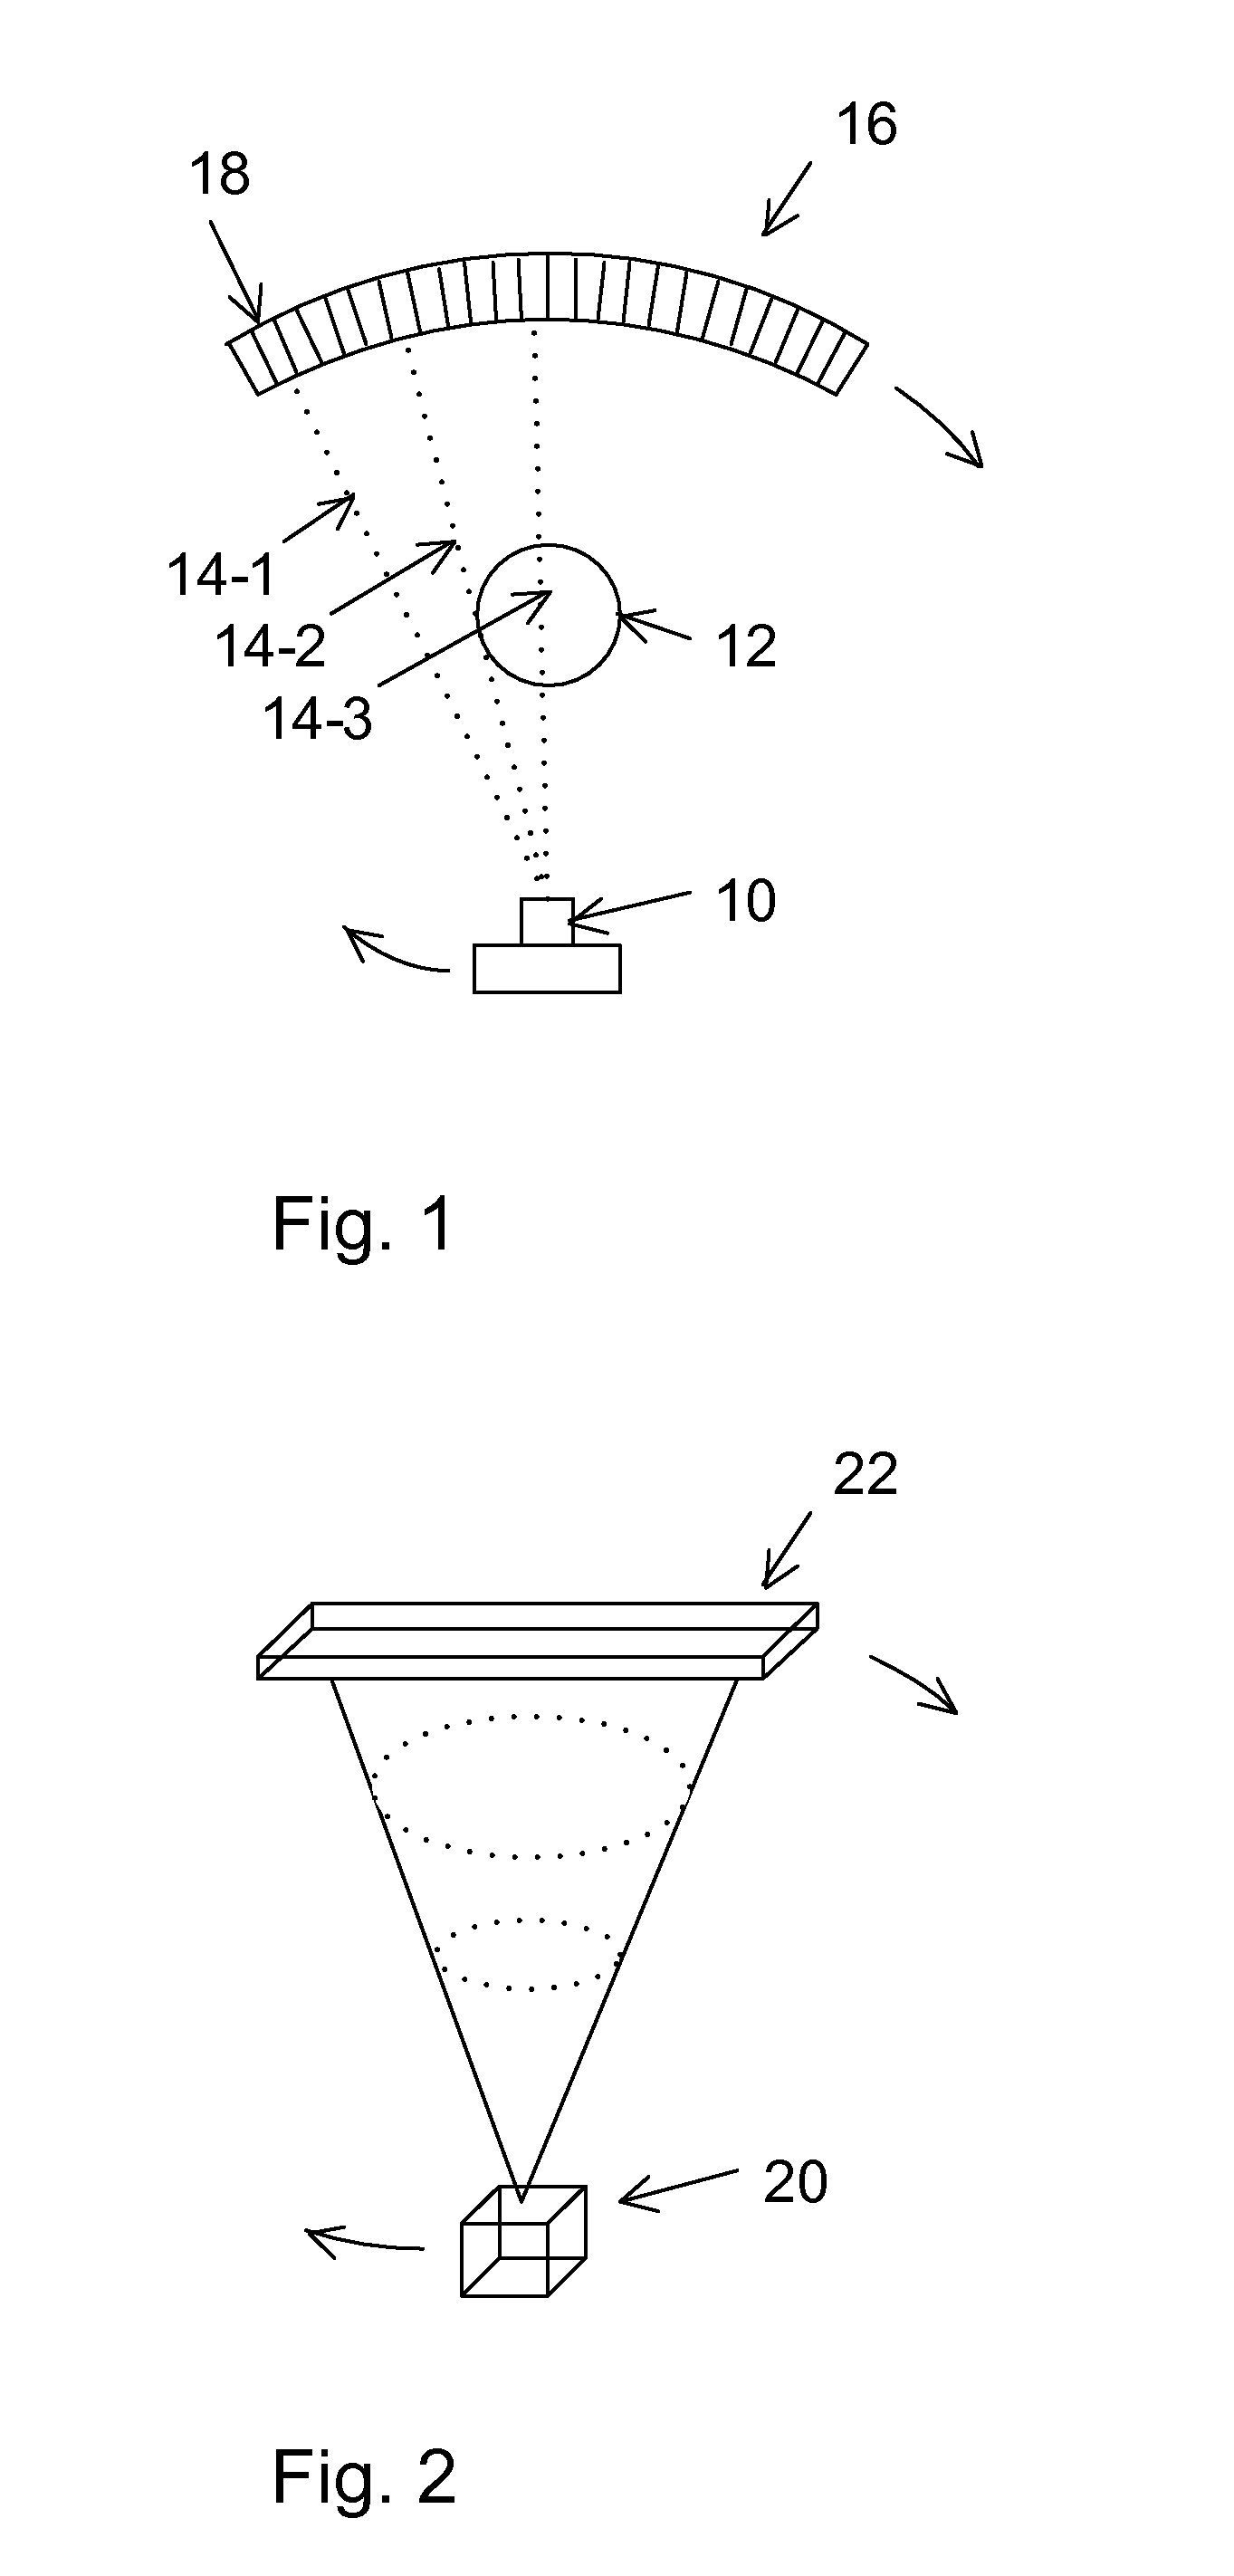 Adaptive anisotropic filtering of projection data for computed tomography